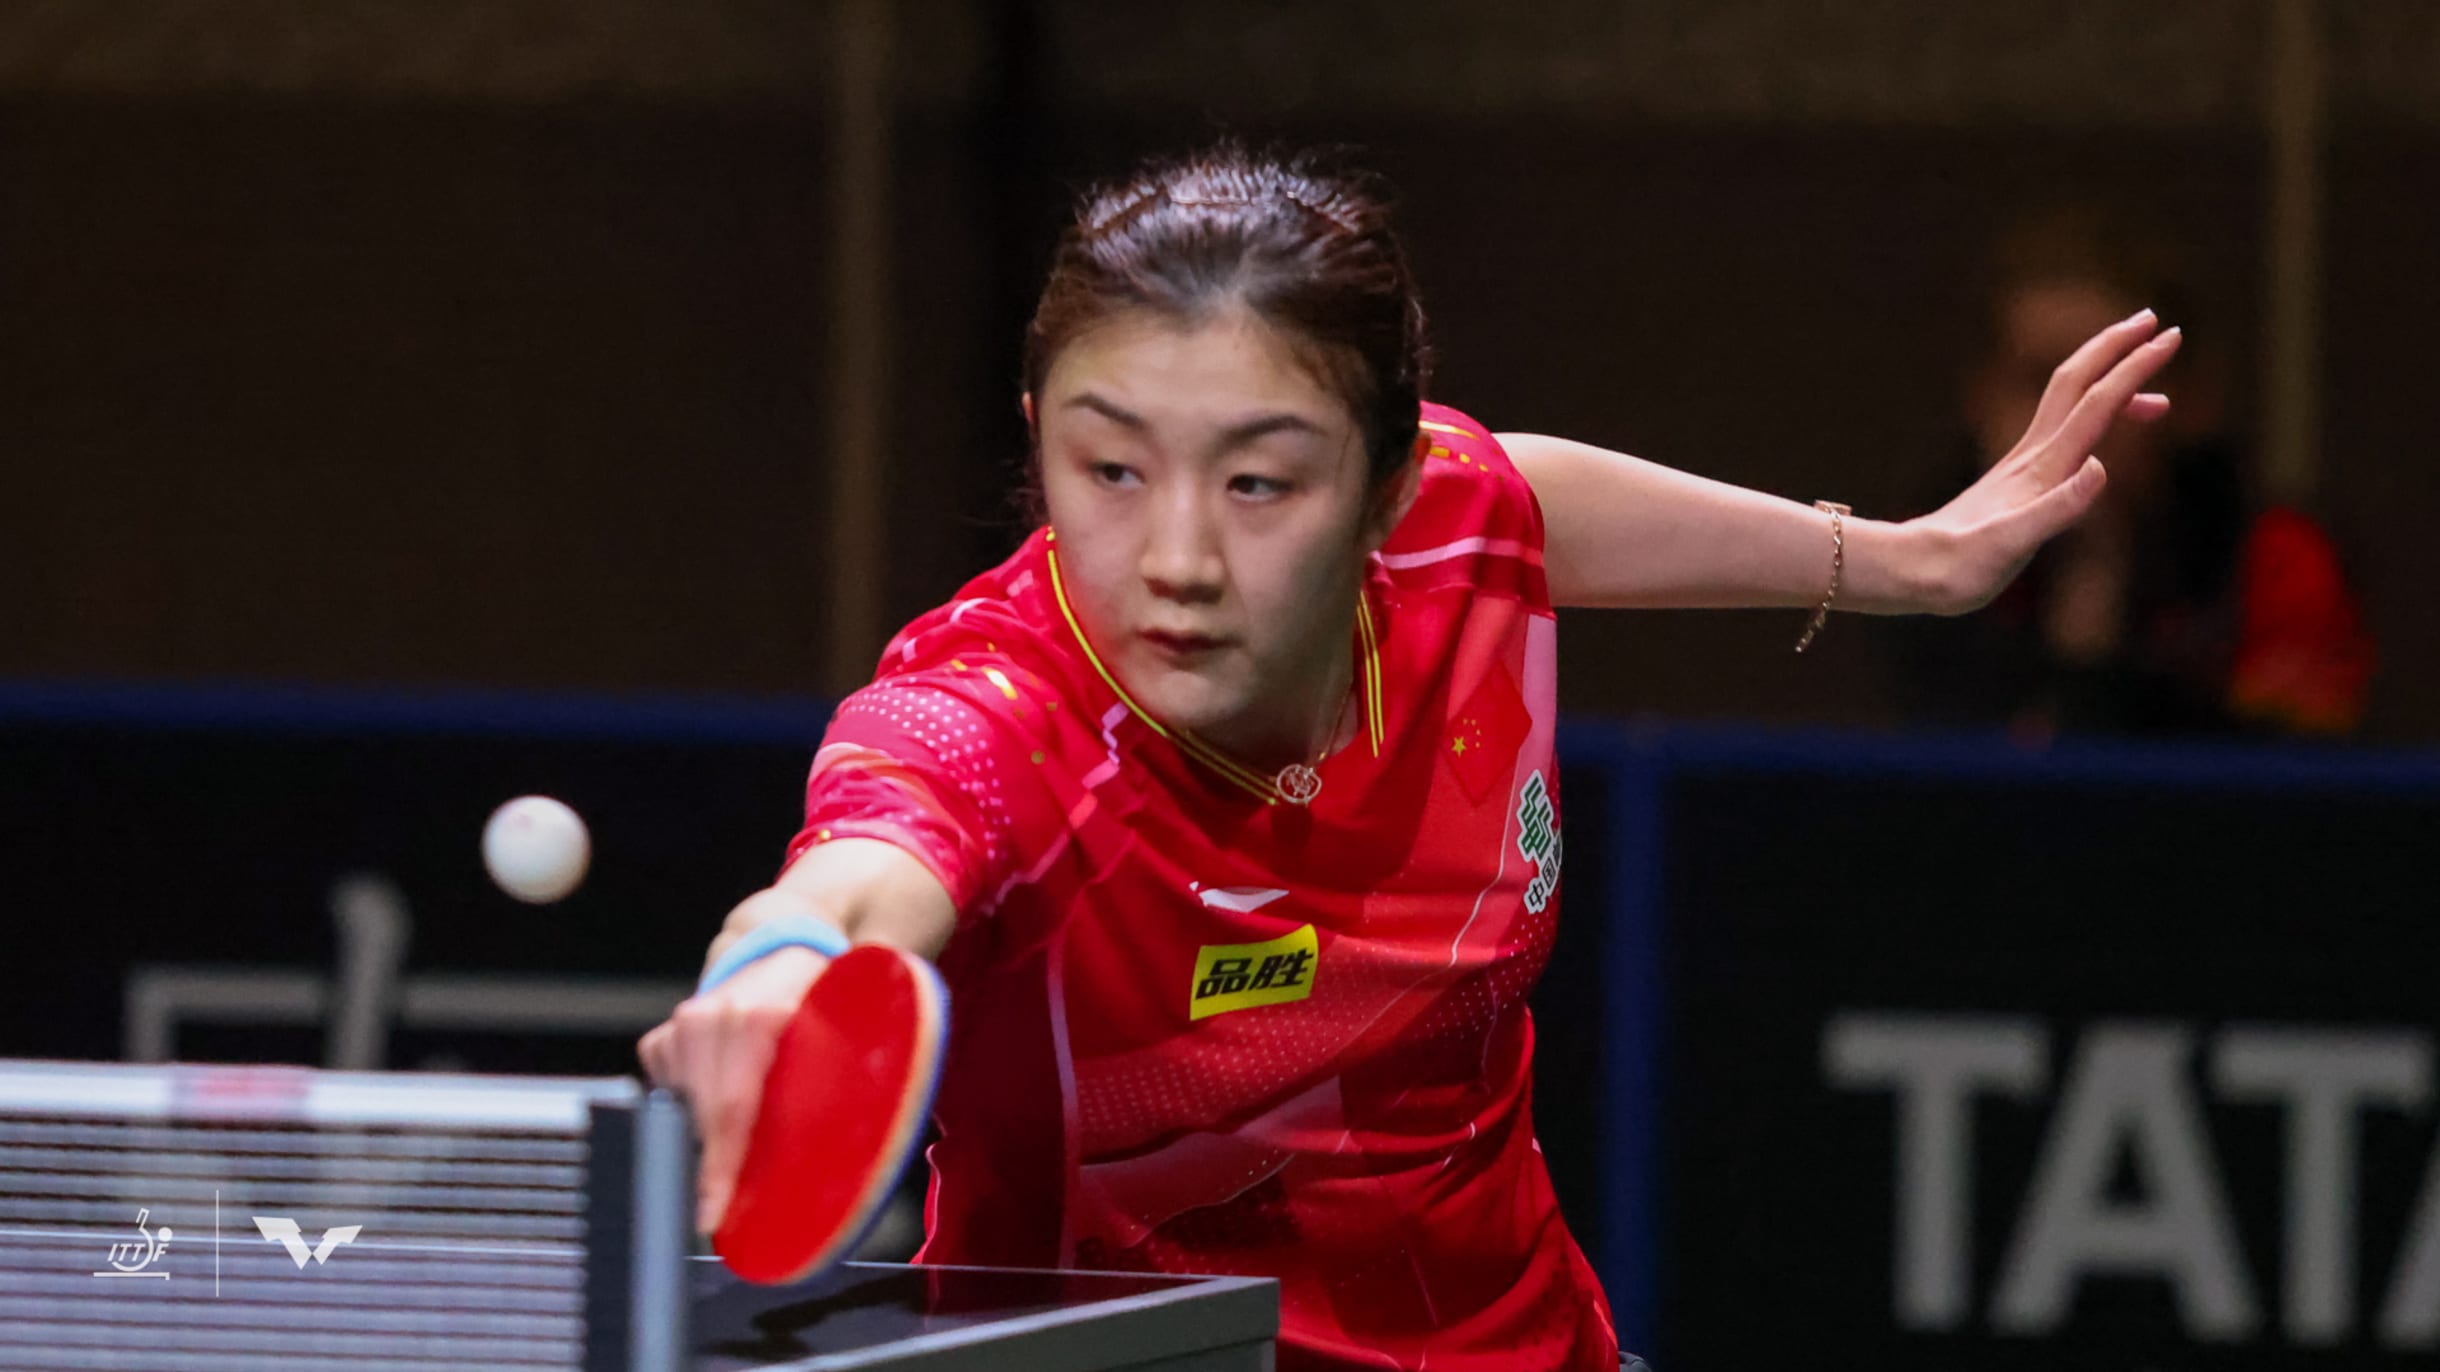 2023 table tennis world championships Olympic champion Chen Meng one step closer to grand slam